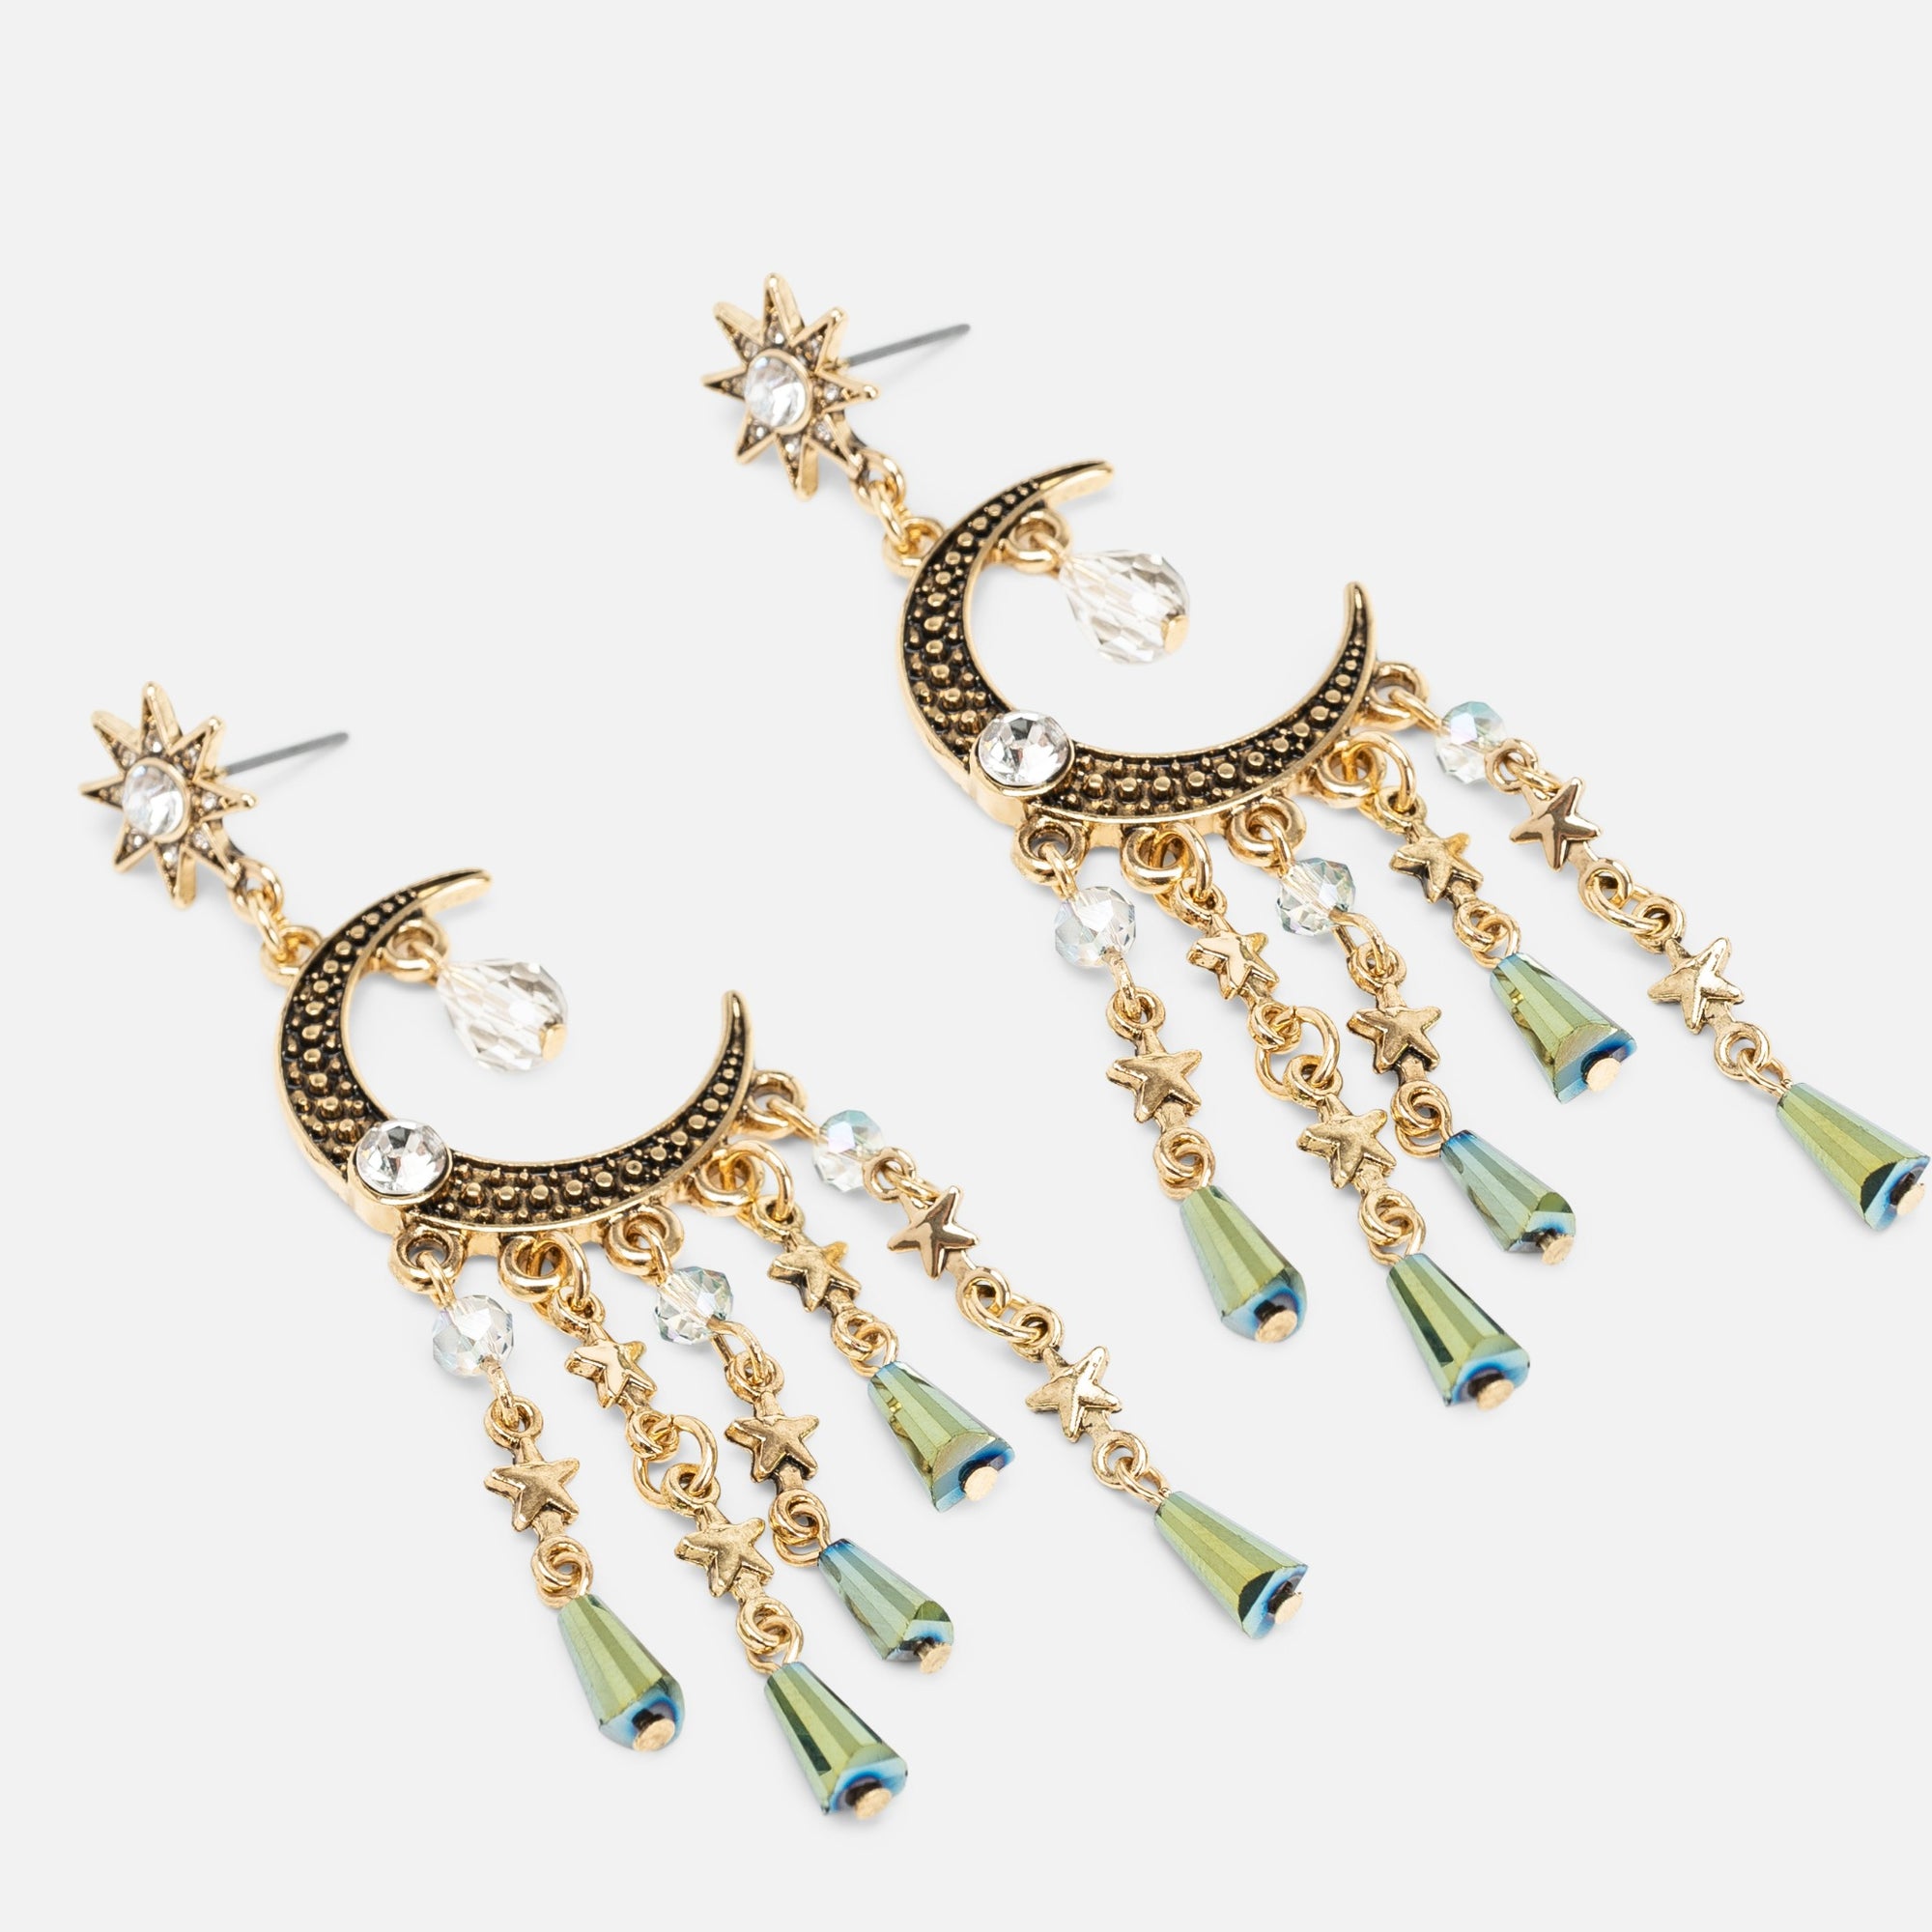 Long golden earrings with moon and star charms and multiple beads